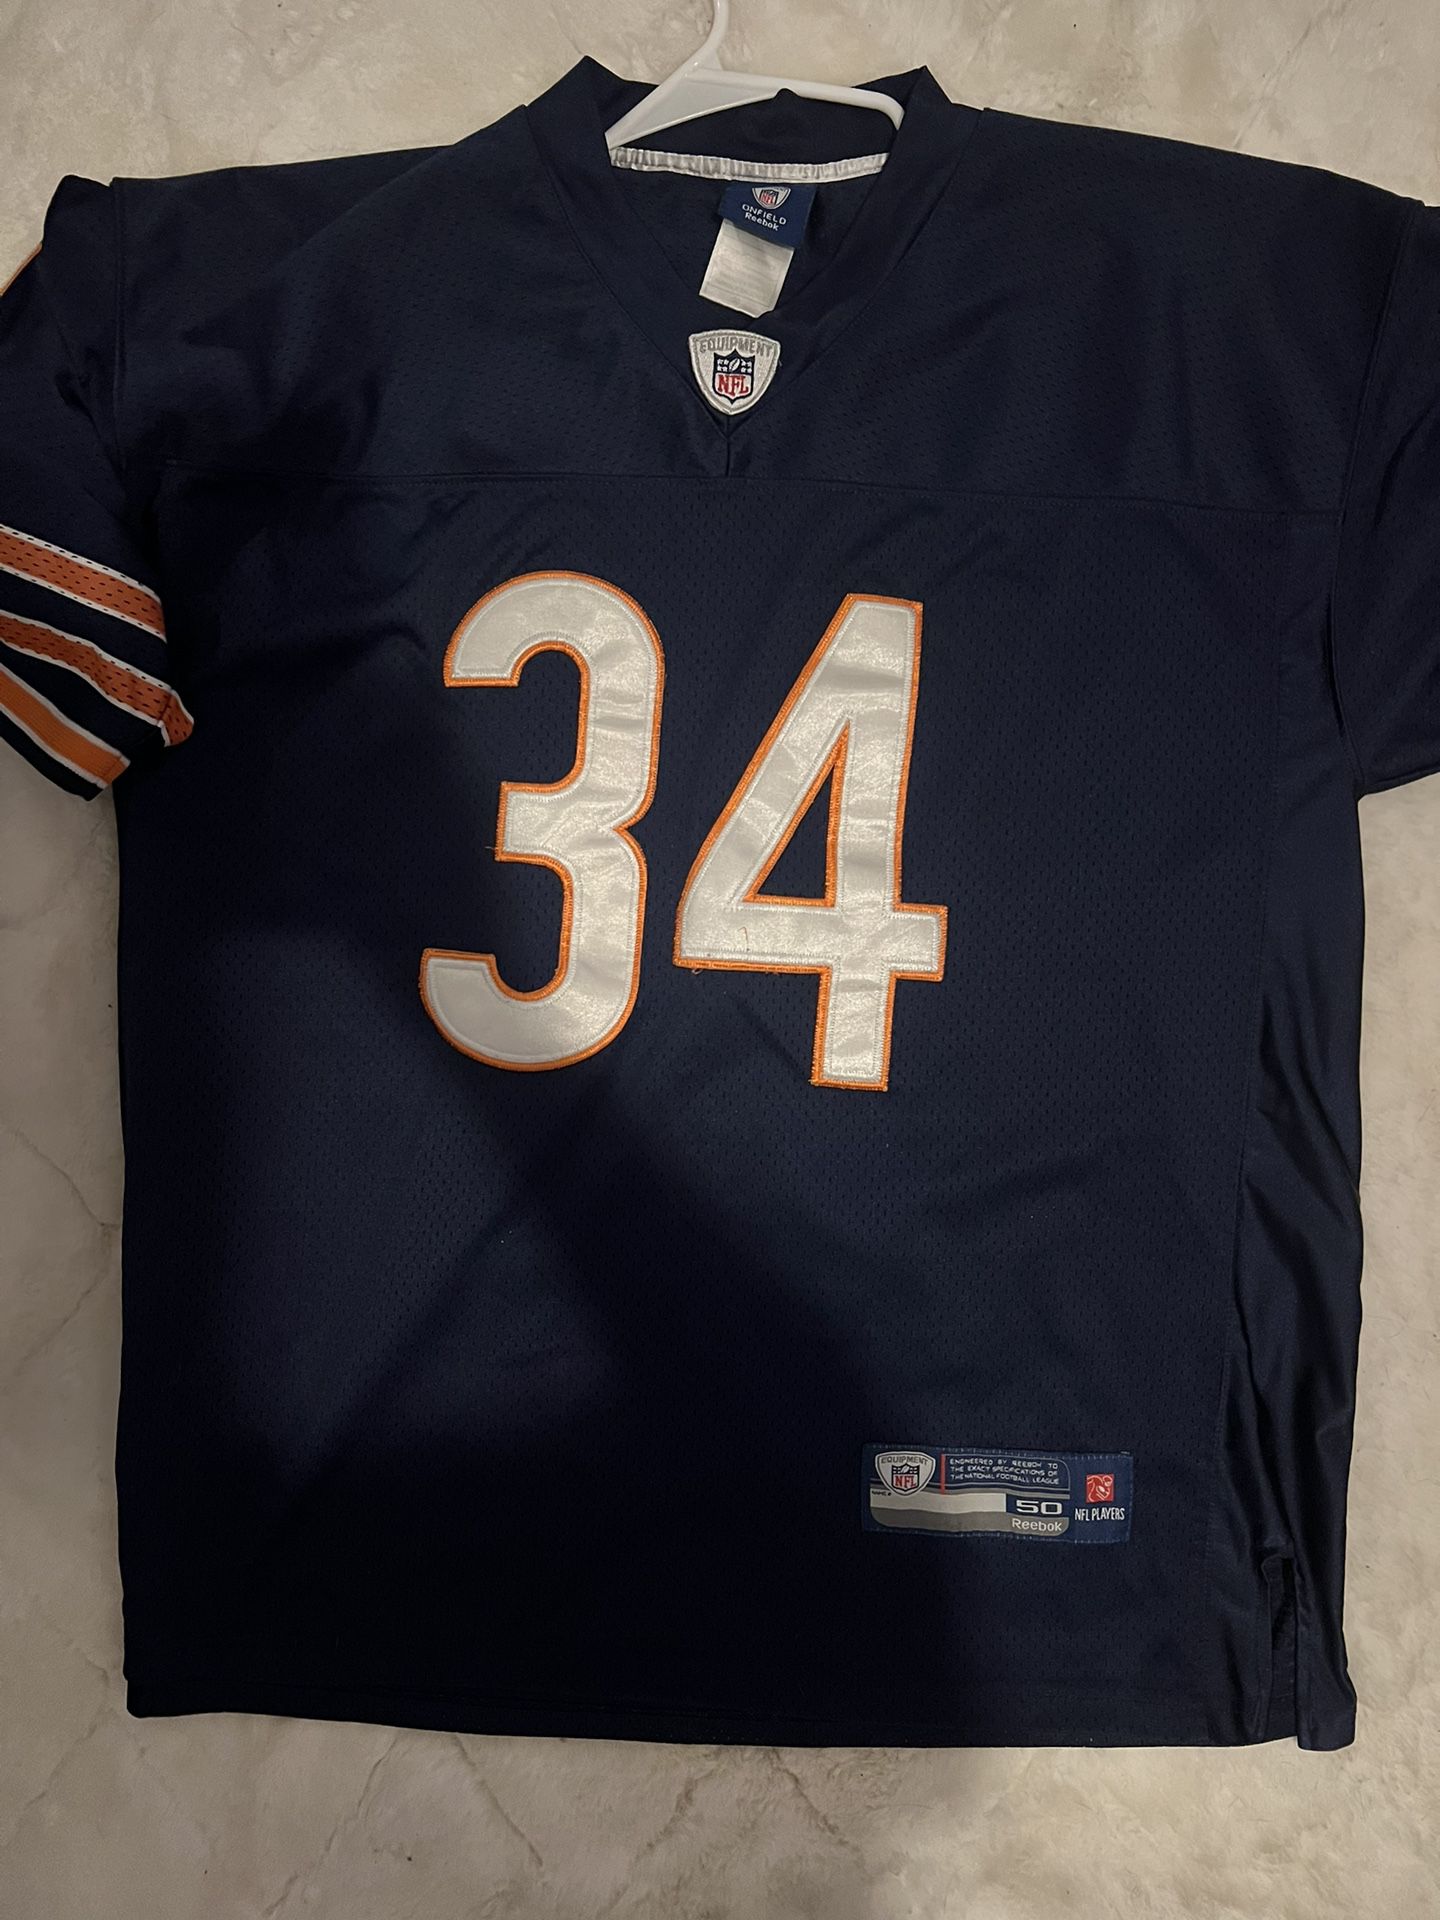 Authentic Chicago Bears Nfl Jerseys